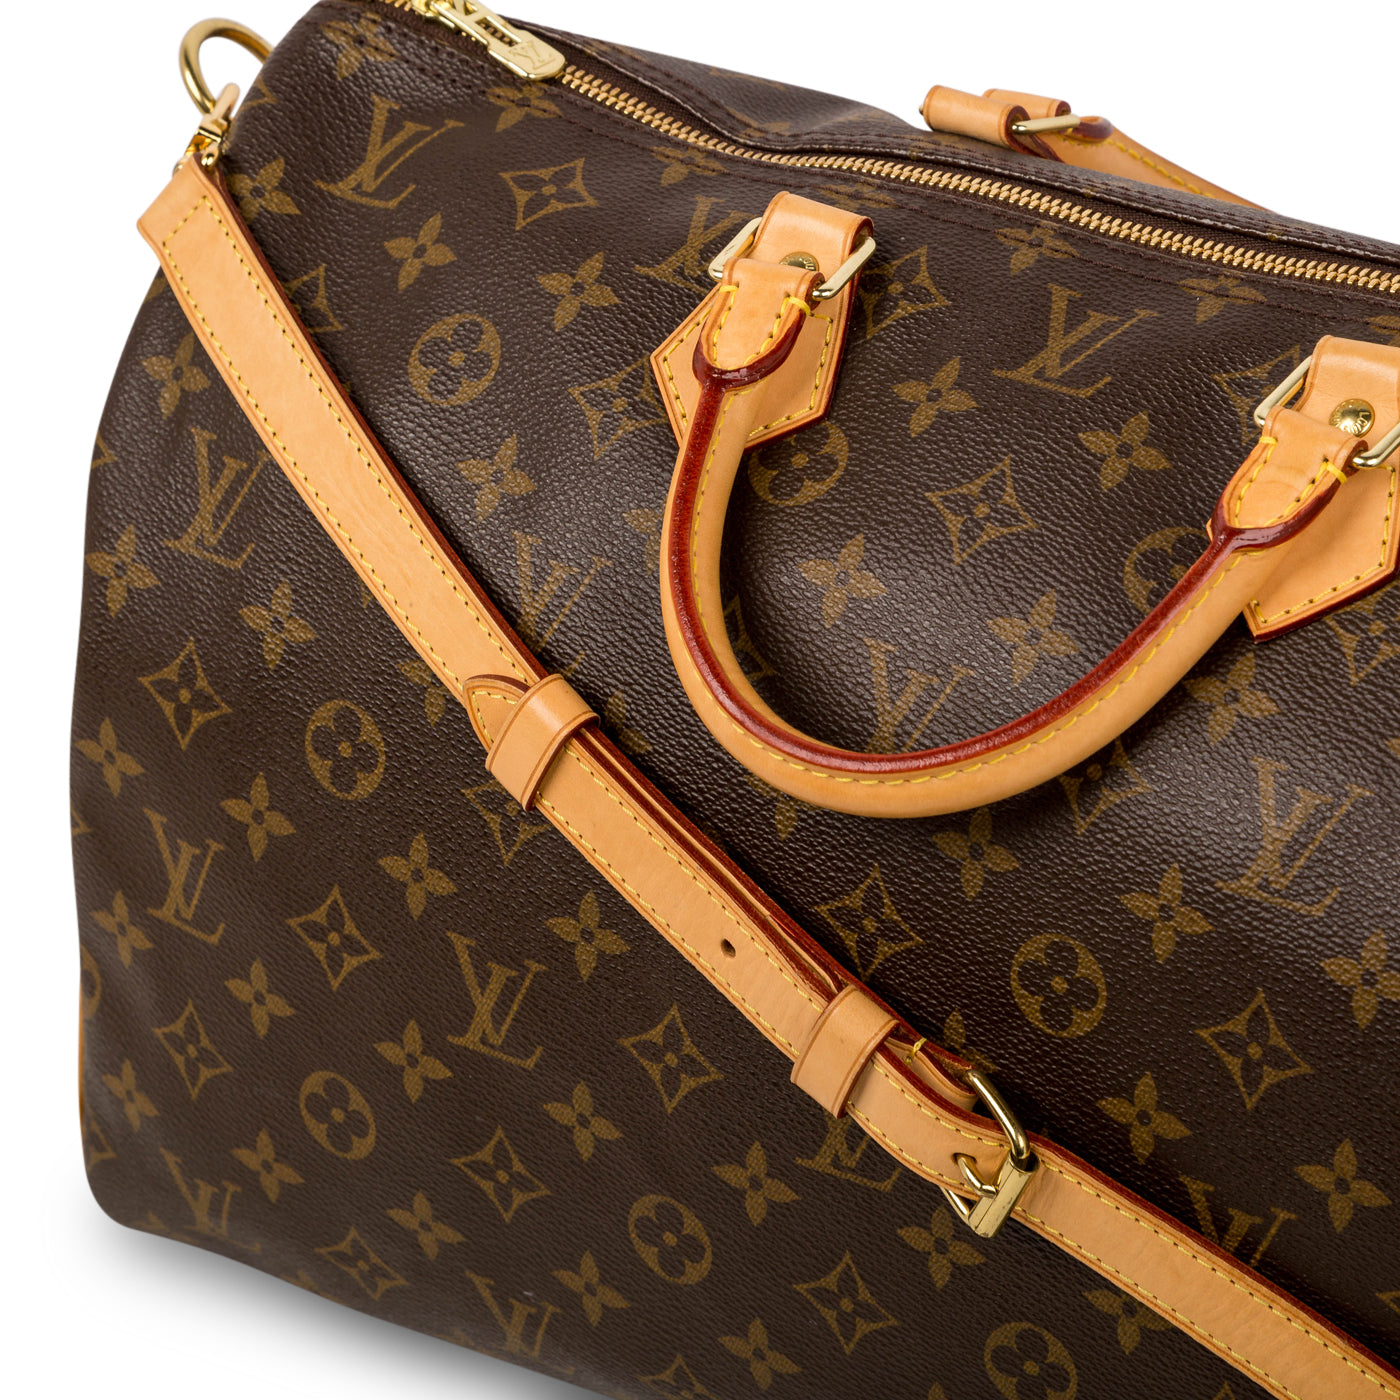 Bauletto Louis Vuitton Speedy Bandouliere 40 in 20149 Milano for